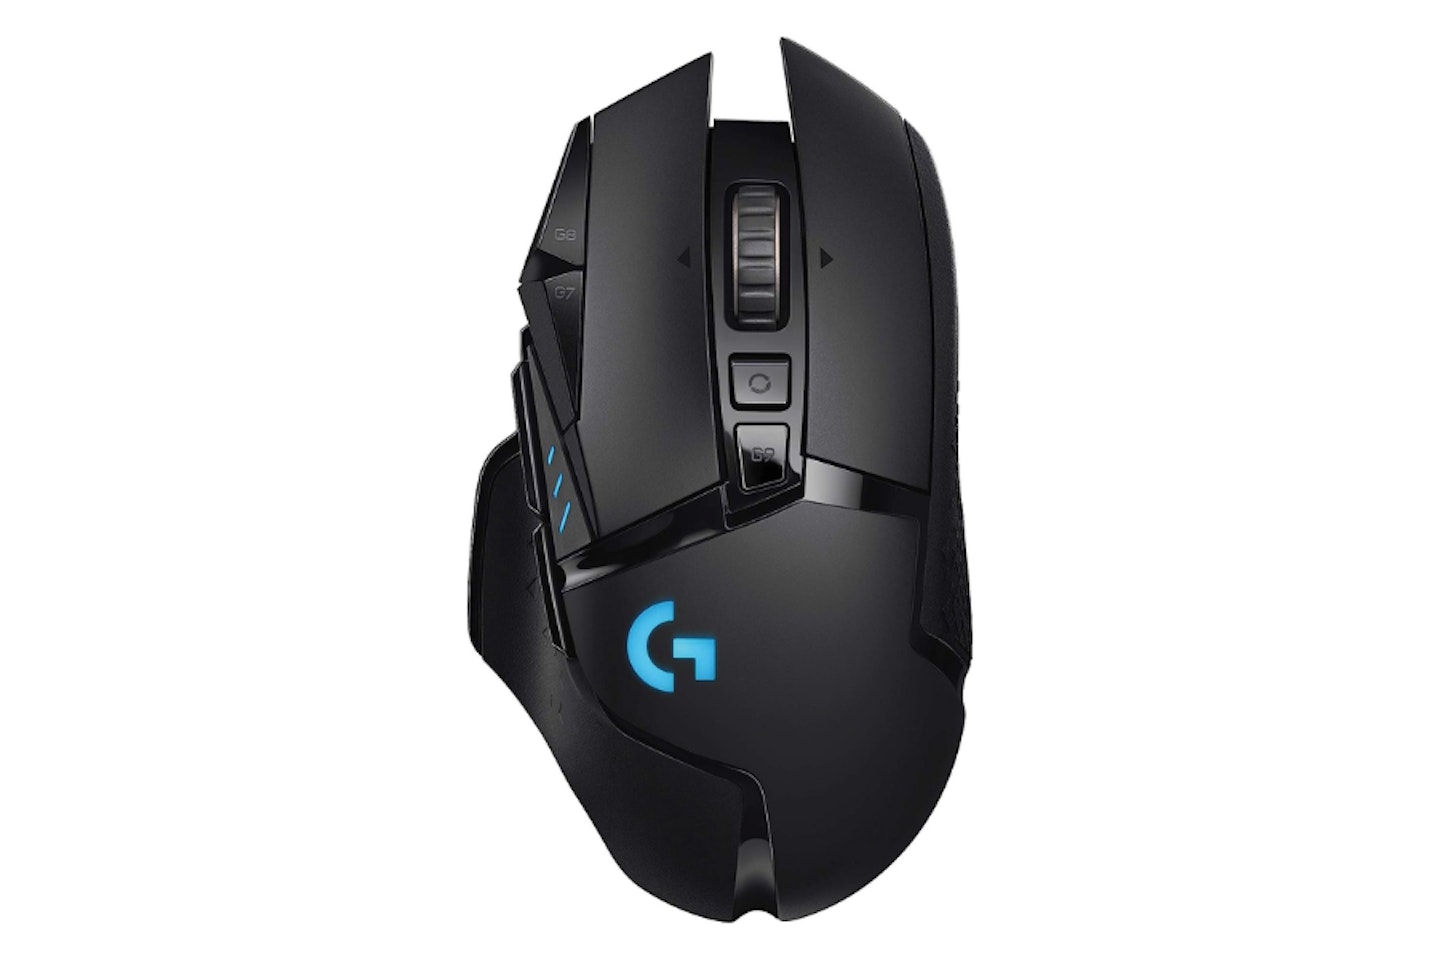 Logitech G502 LIGHTSPEED Wireless Gaming Mouse - one of the best gifts for gamers